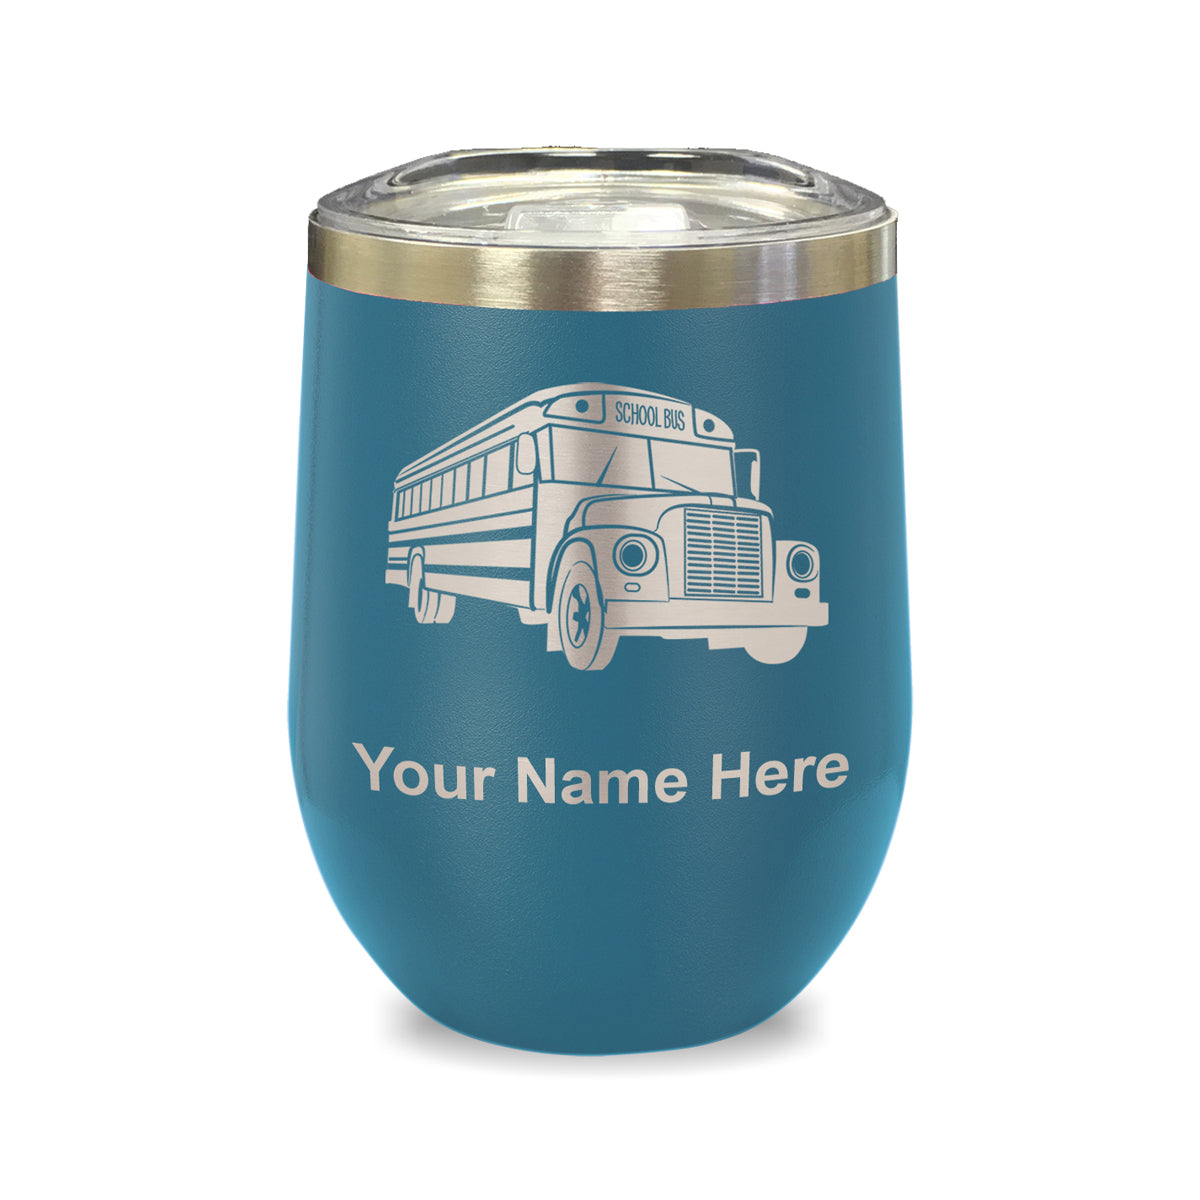 LaserGram Double Wall Stainless Steel Wine Glass, School Bus, Personalized Engraving Included